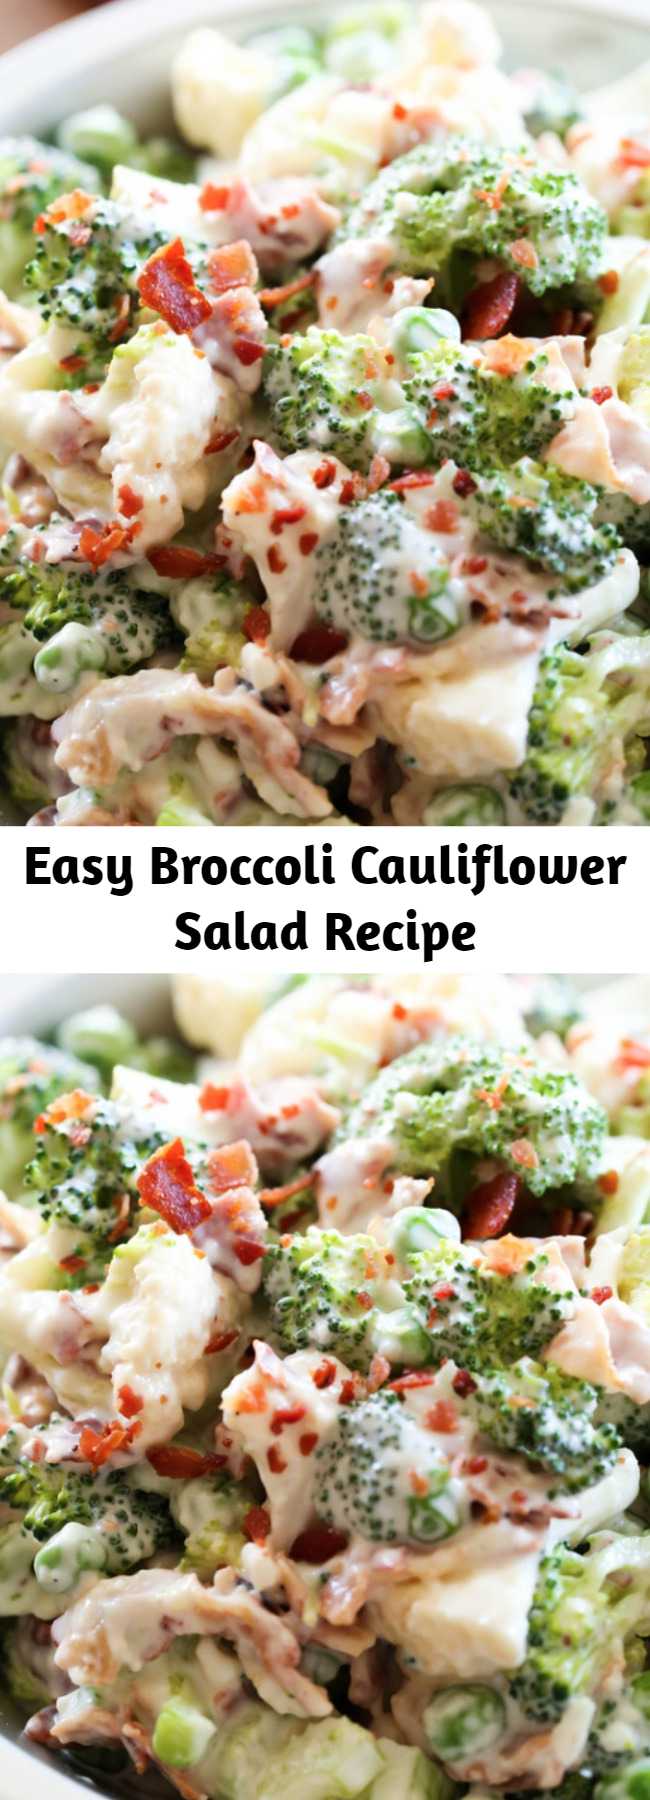 Easy Broccoli Cauliflower Salad Recipe - This salad is AMAZING! The creamy dressing is beyond delicious and go perfectly with the crisp broccoli and cauliflower! This is one recipe you are going to want to try out!